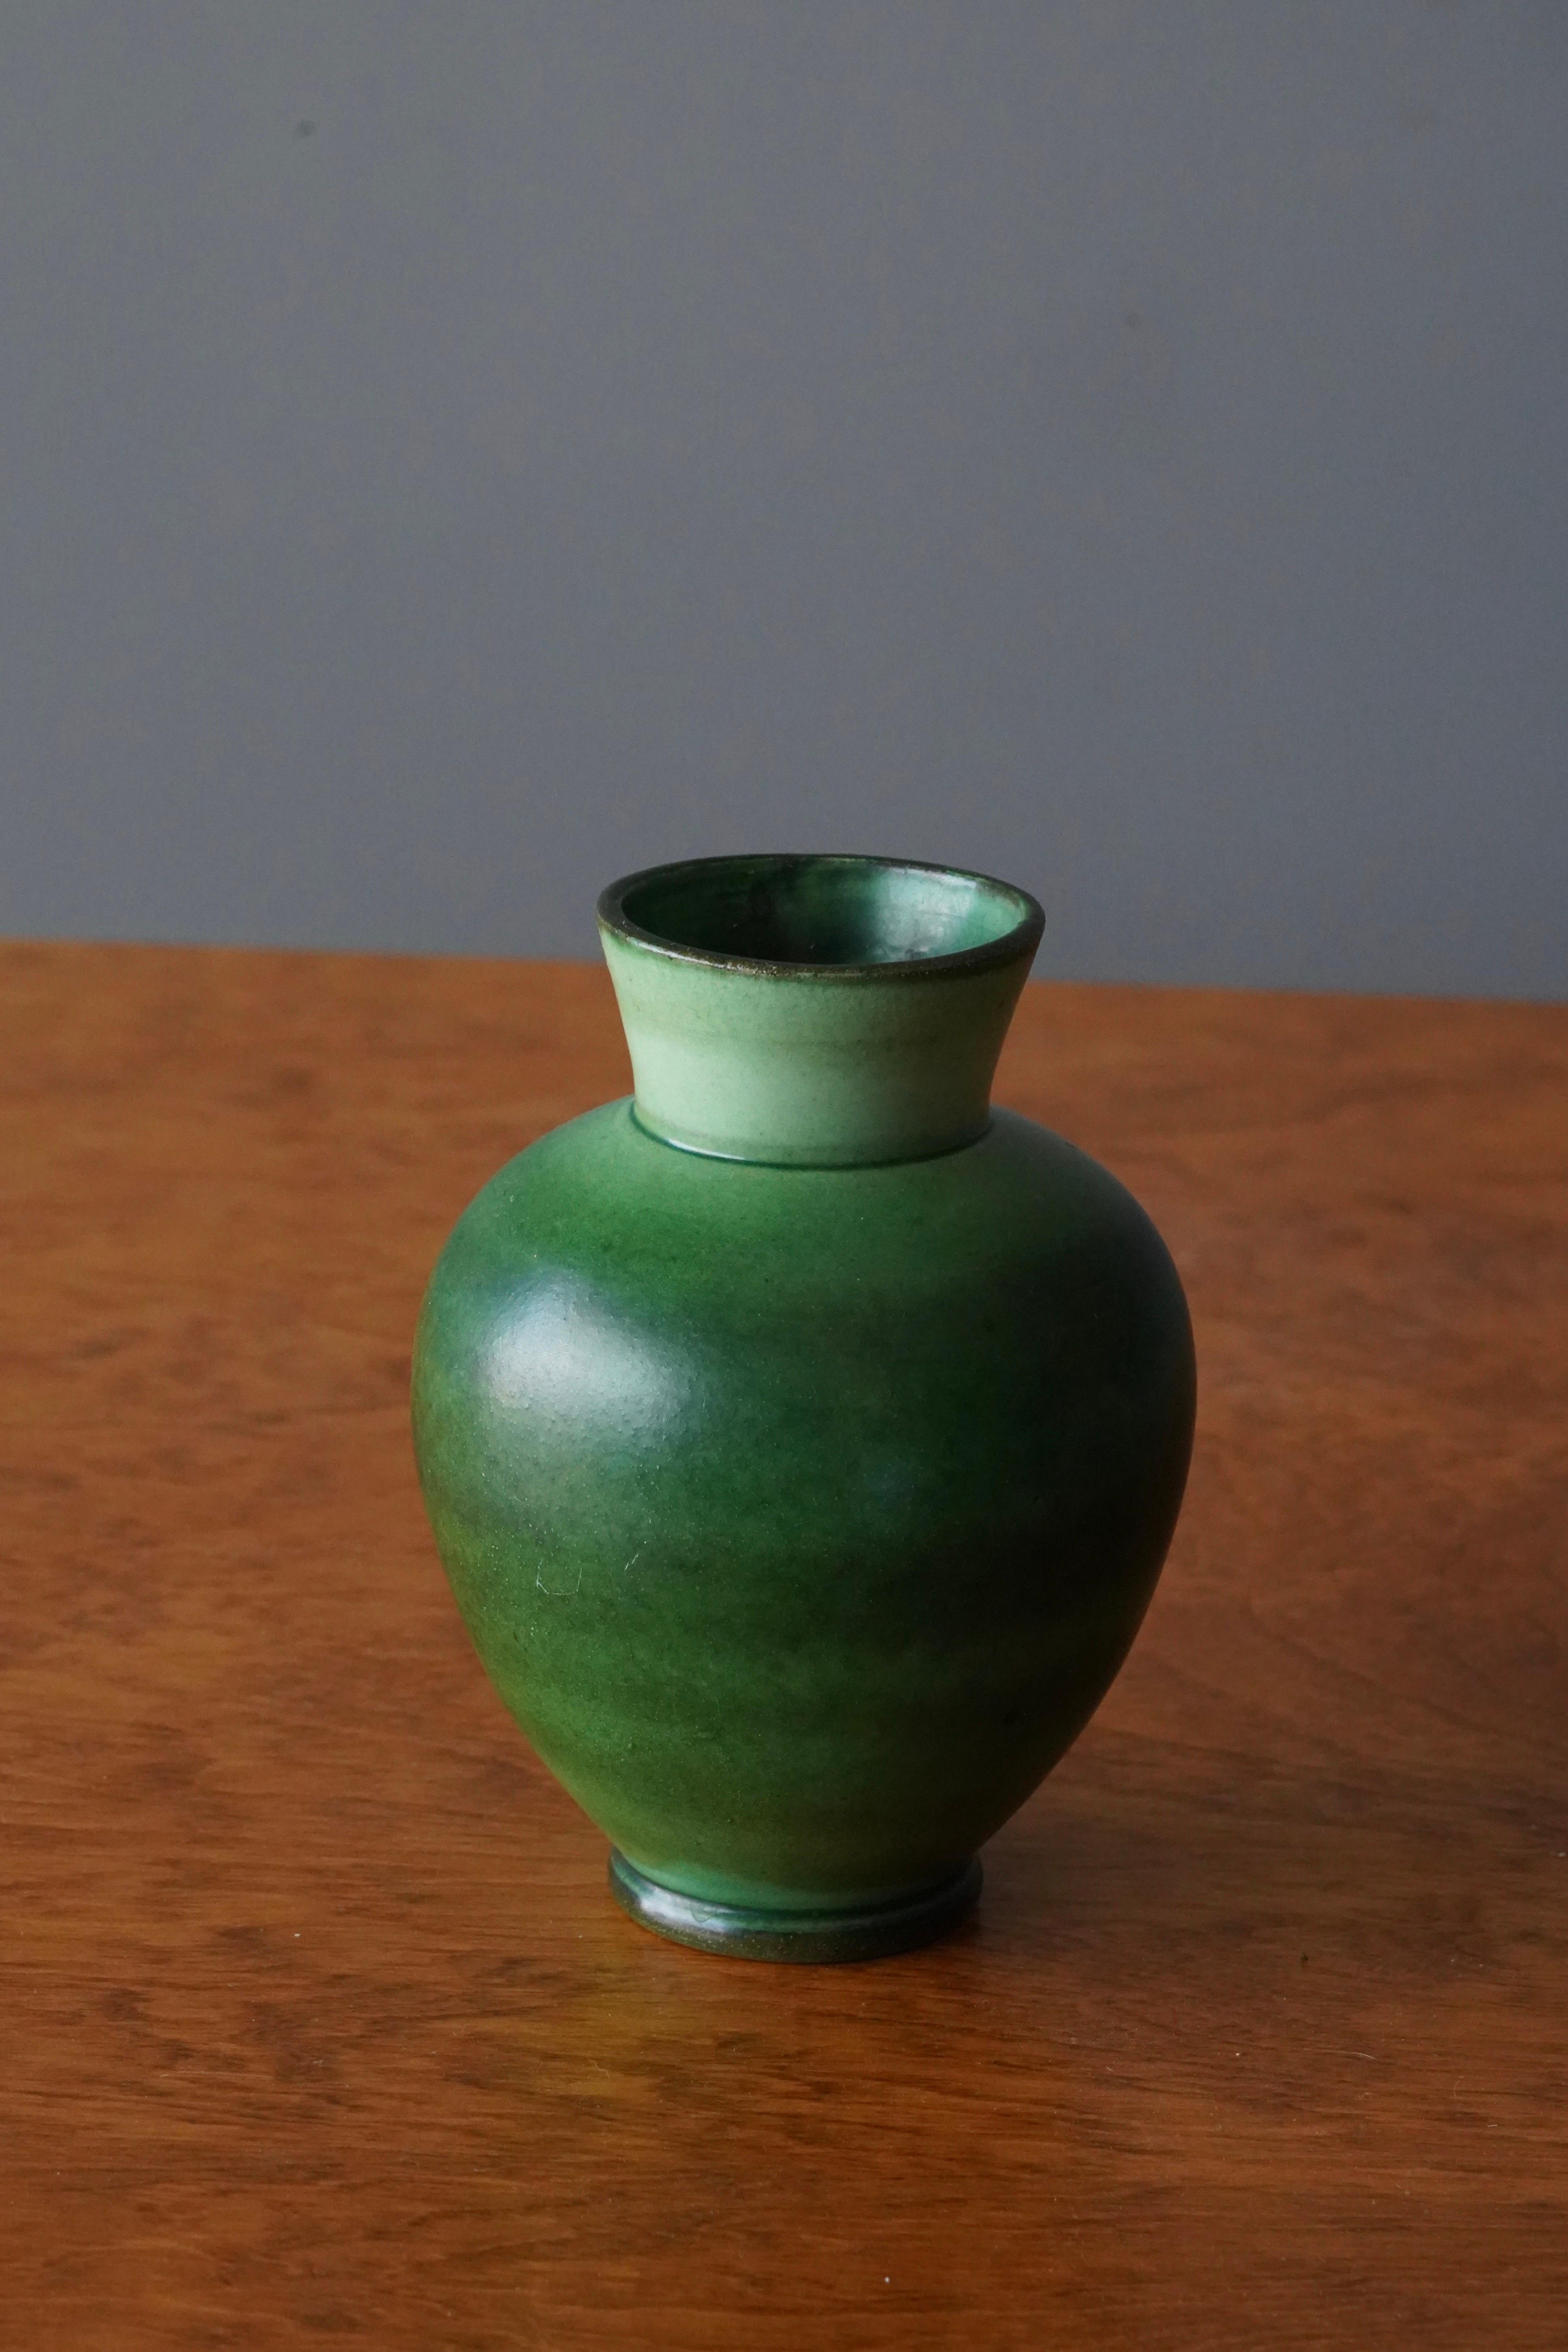 A ceramic vase by Nittsjö. Produced in Sweden, 1940s. Signed. 

In a highly artistic green glaze. Features a sculptural handgrip.

